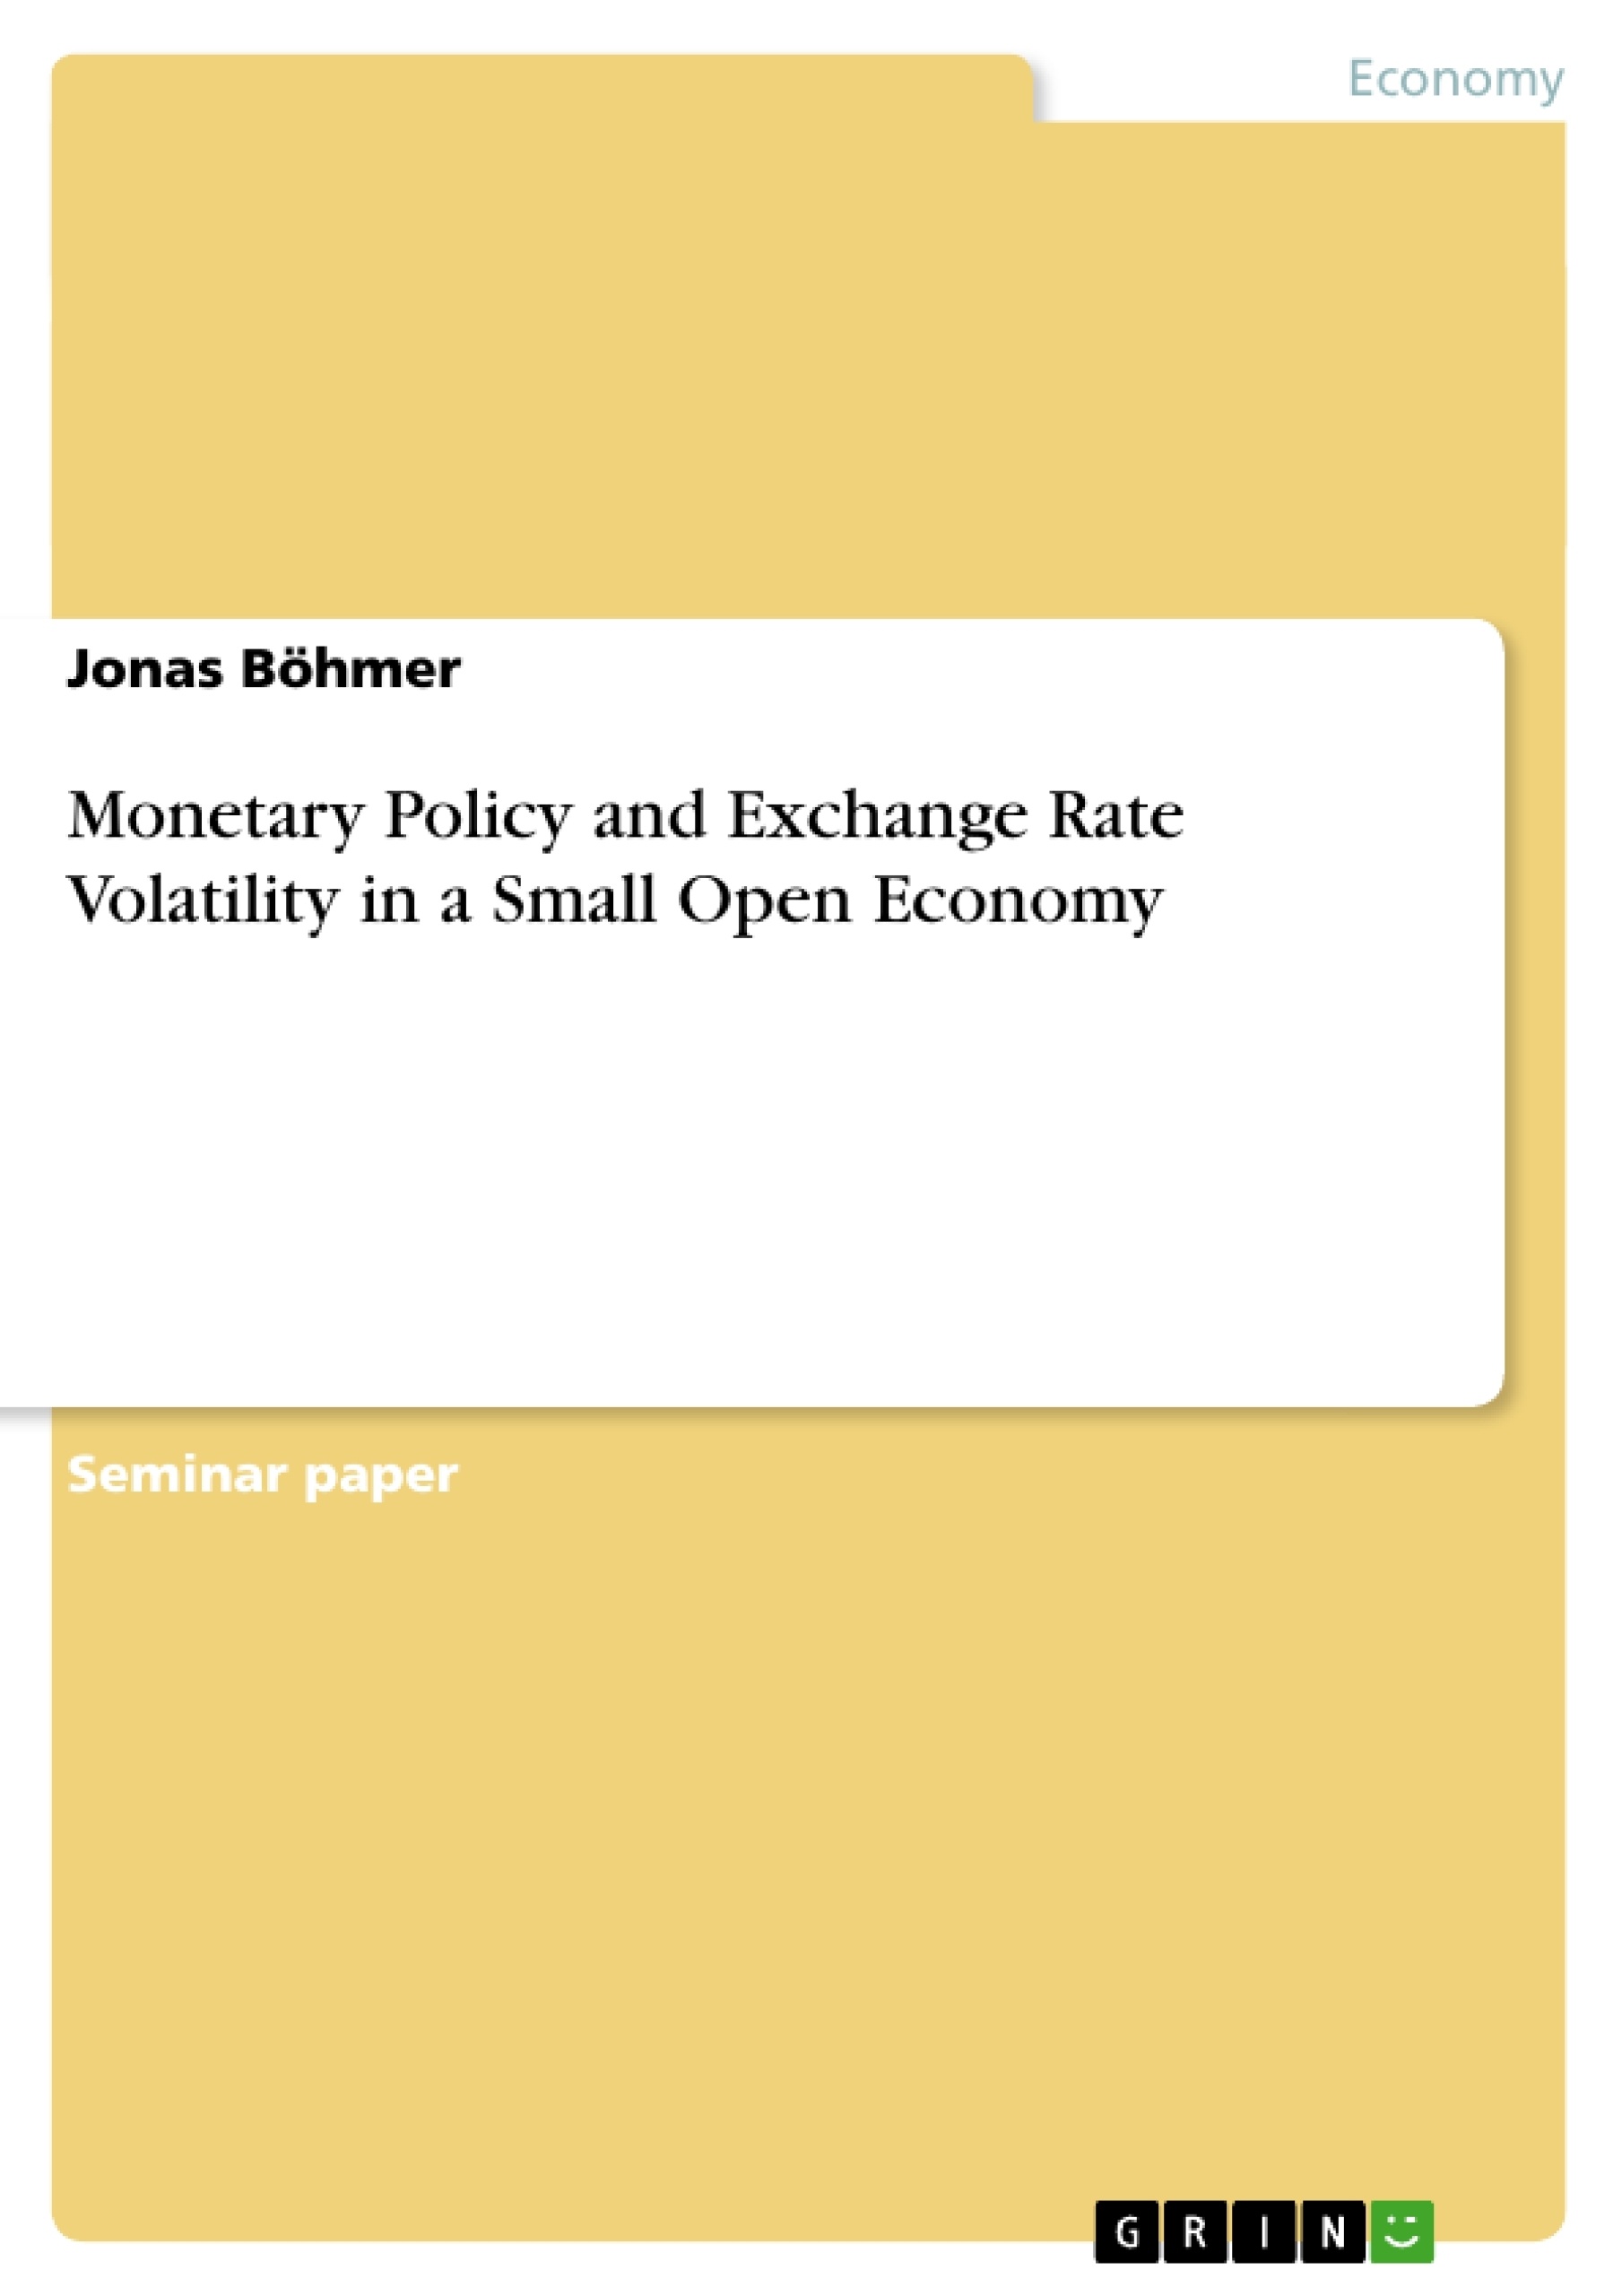 Título: Monetary Policy and Exchange Rate Volatility in a Small Open Economy